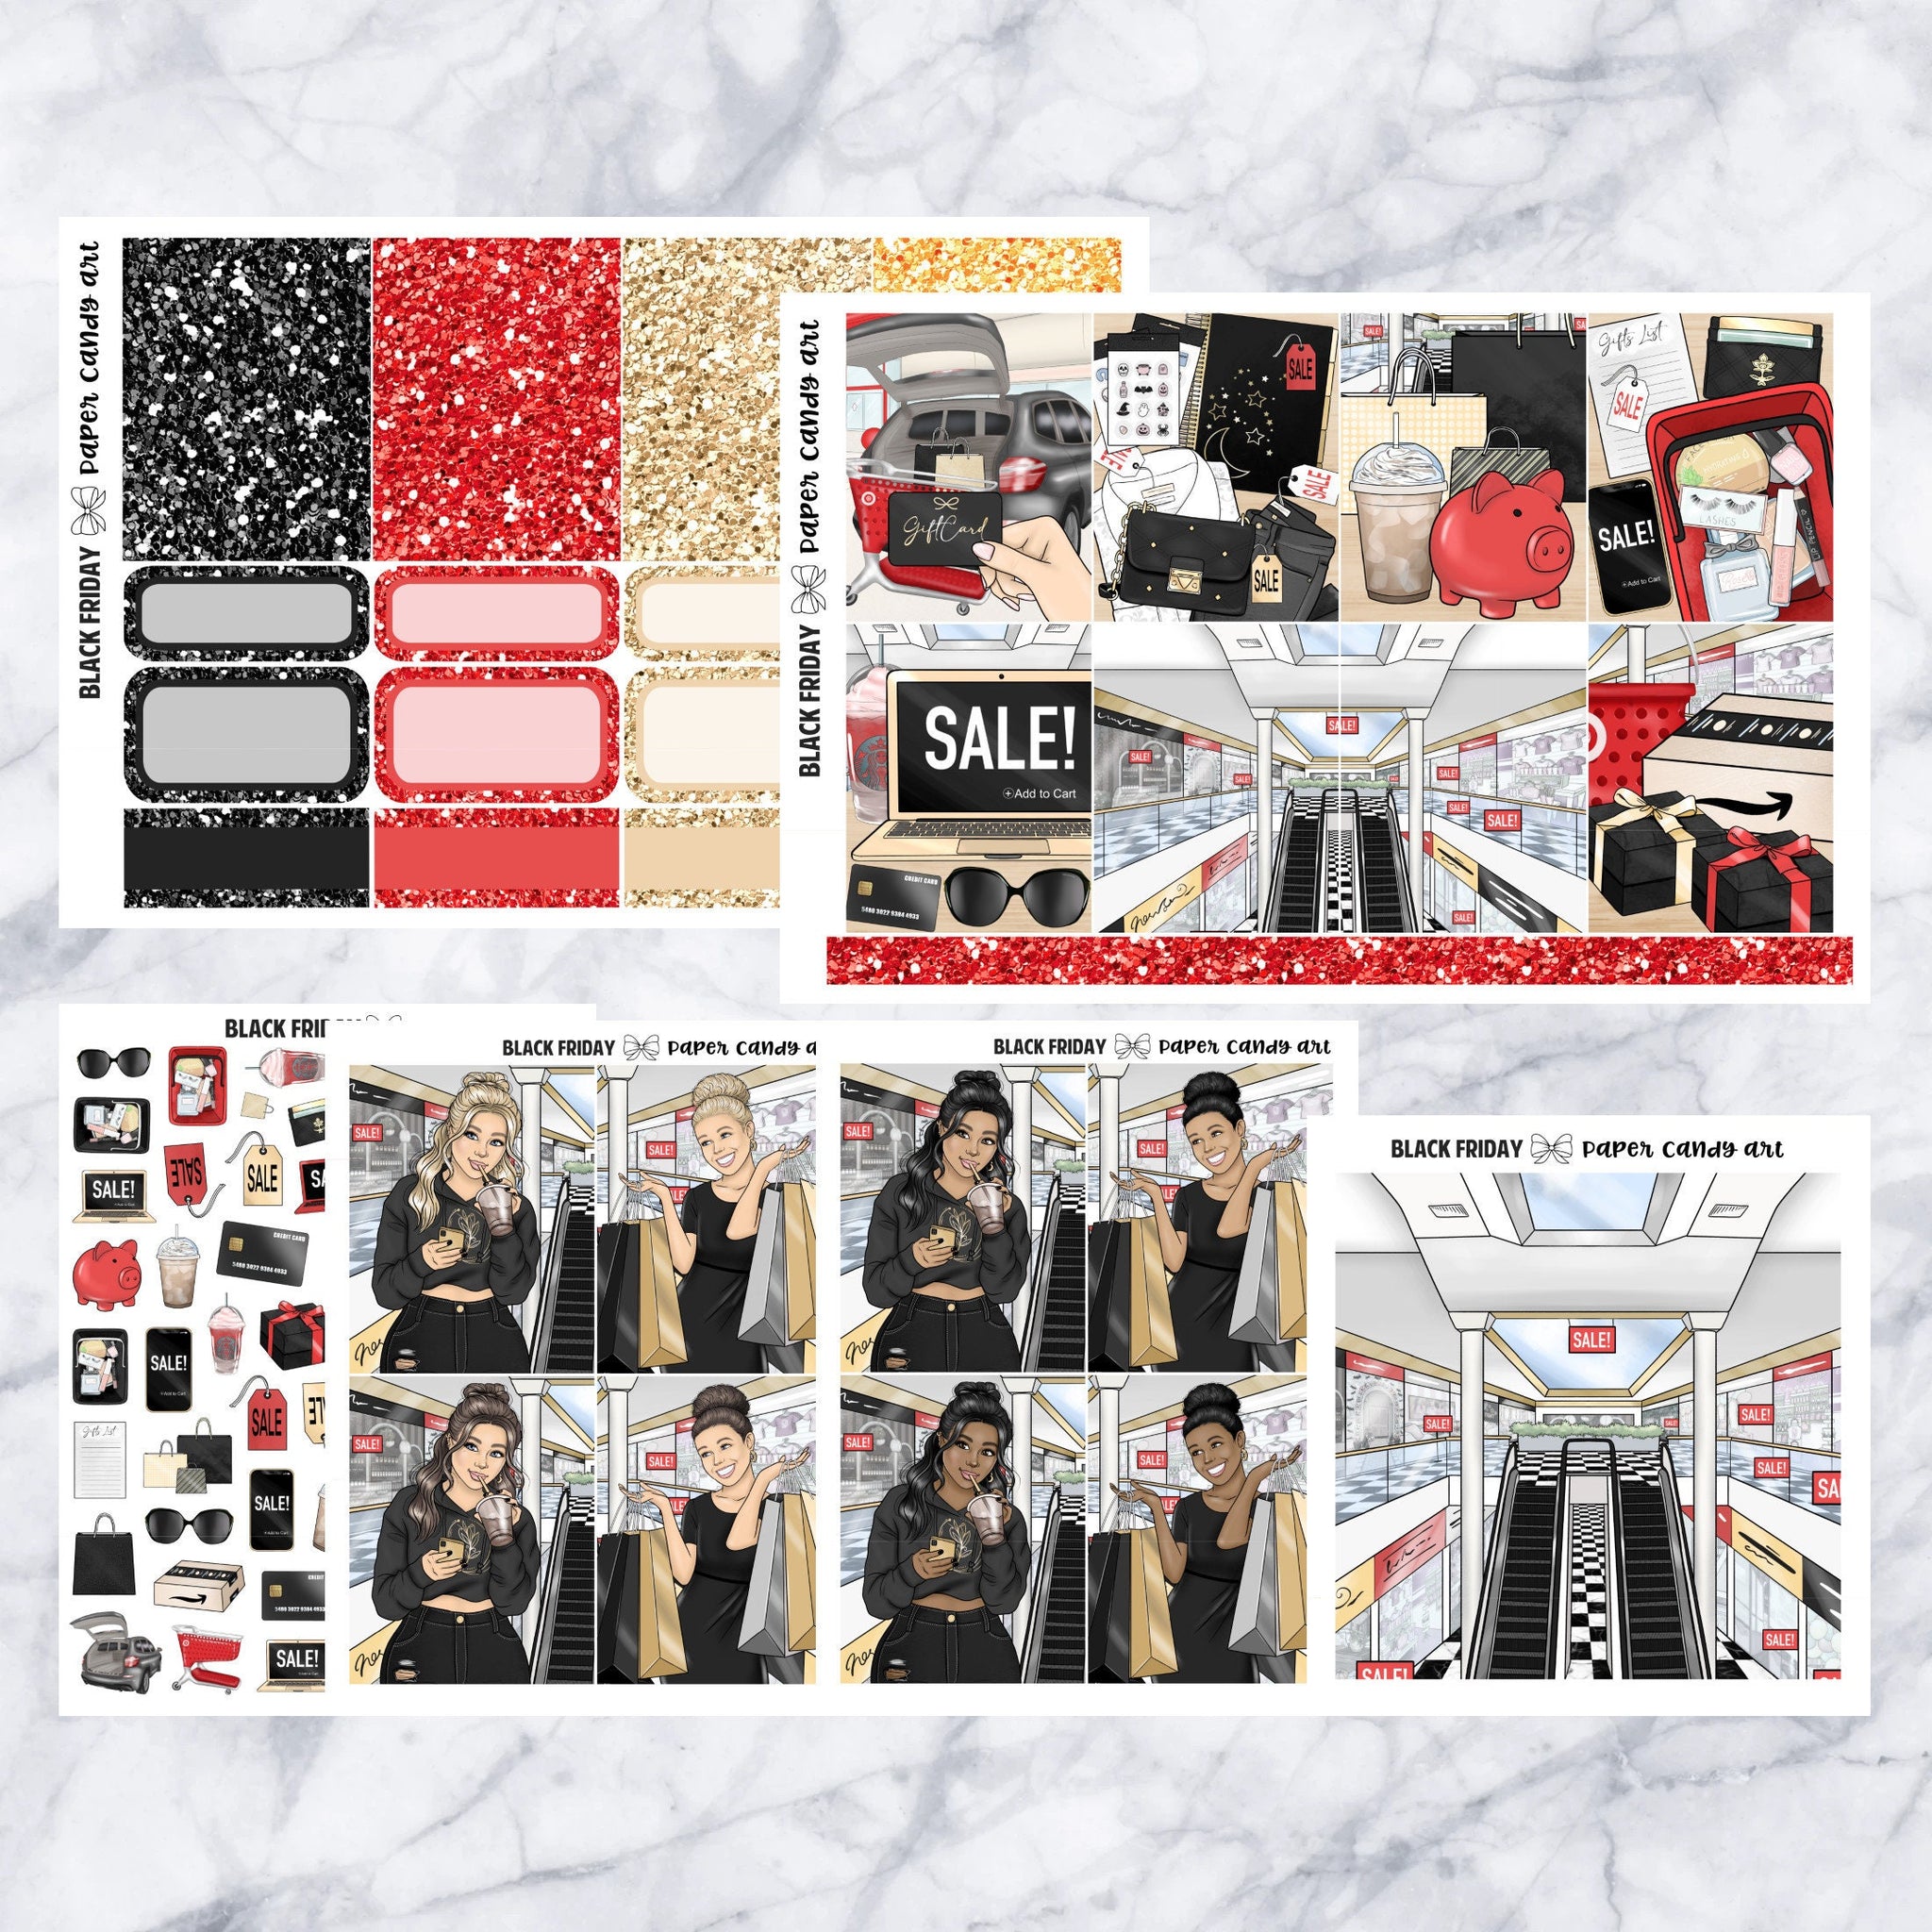 ADD-ONS Black Friday // Planner Stickers // double box, glitter headers, full boxes, deco, fashion girls